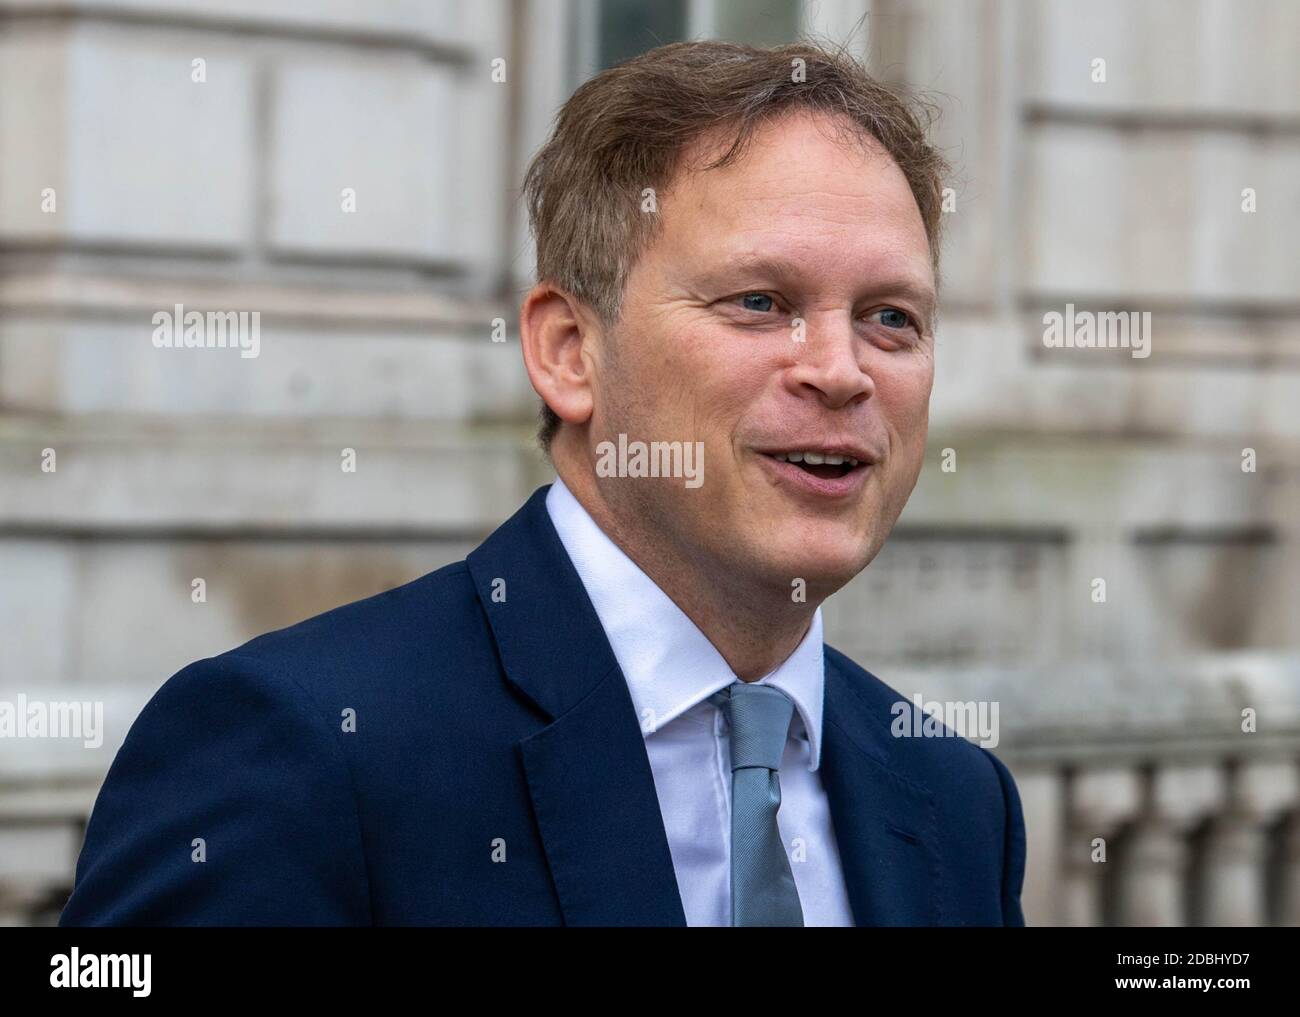 London, UK. 17th Nov, 2020. Grant Shapps Secretary of State for Transport since 2019 leaves the Cabinet Office in Whitehall. Shapps also has Cabinet responsibility for the Northern Powerhouse. A member of the Conservative Party, he has been the Member of Parliament (MP) for Welwyn Hatfield since the 2005 general election. Credit: Ian Davidson/Alamy Live News Stock Photo